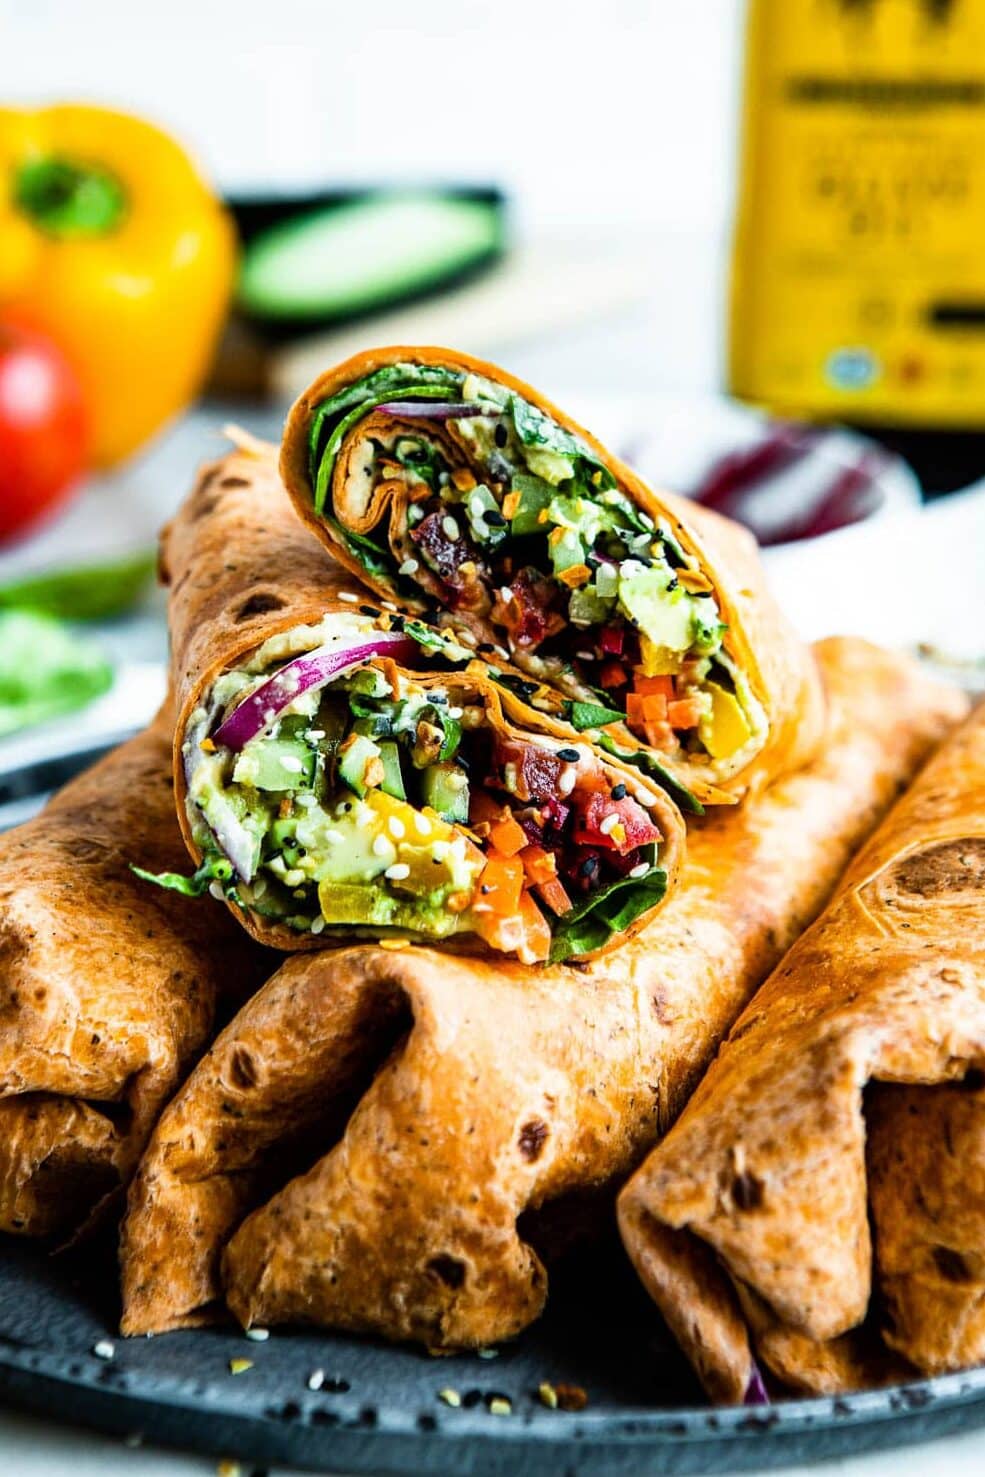 plant based wraps stuffed with cucumber, red onion, carrots, hummus, lettuce and everything bagel seasoning.